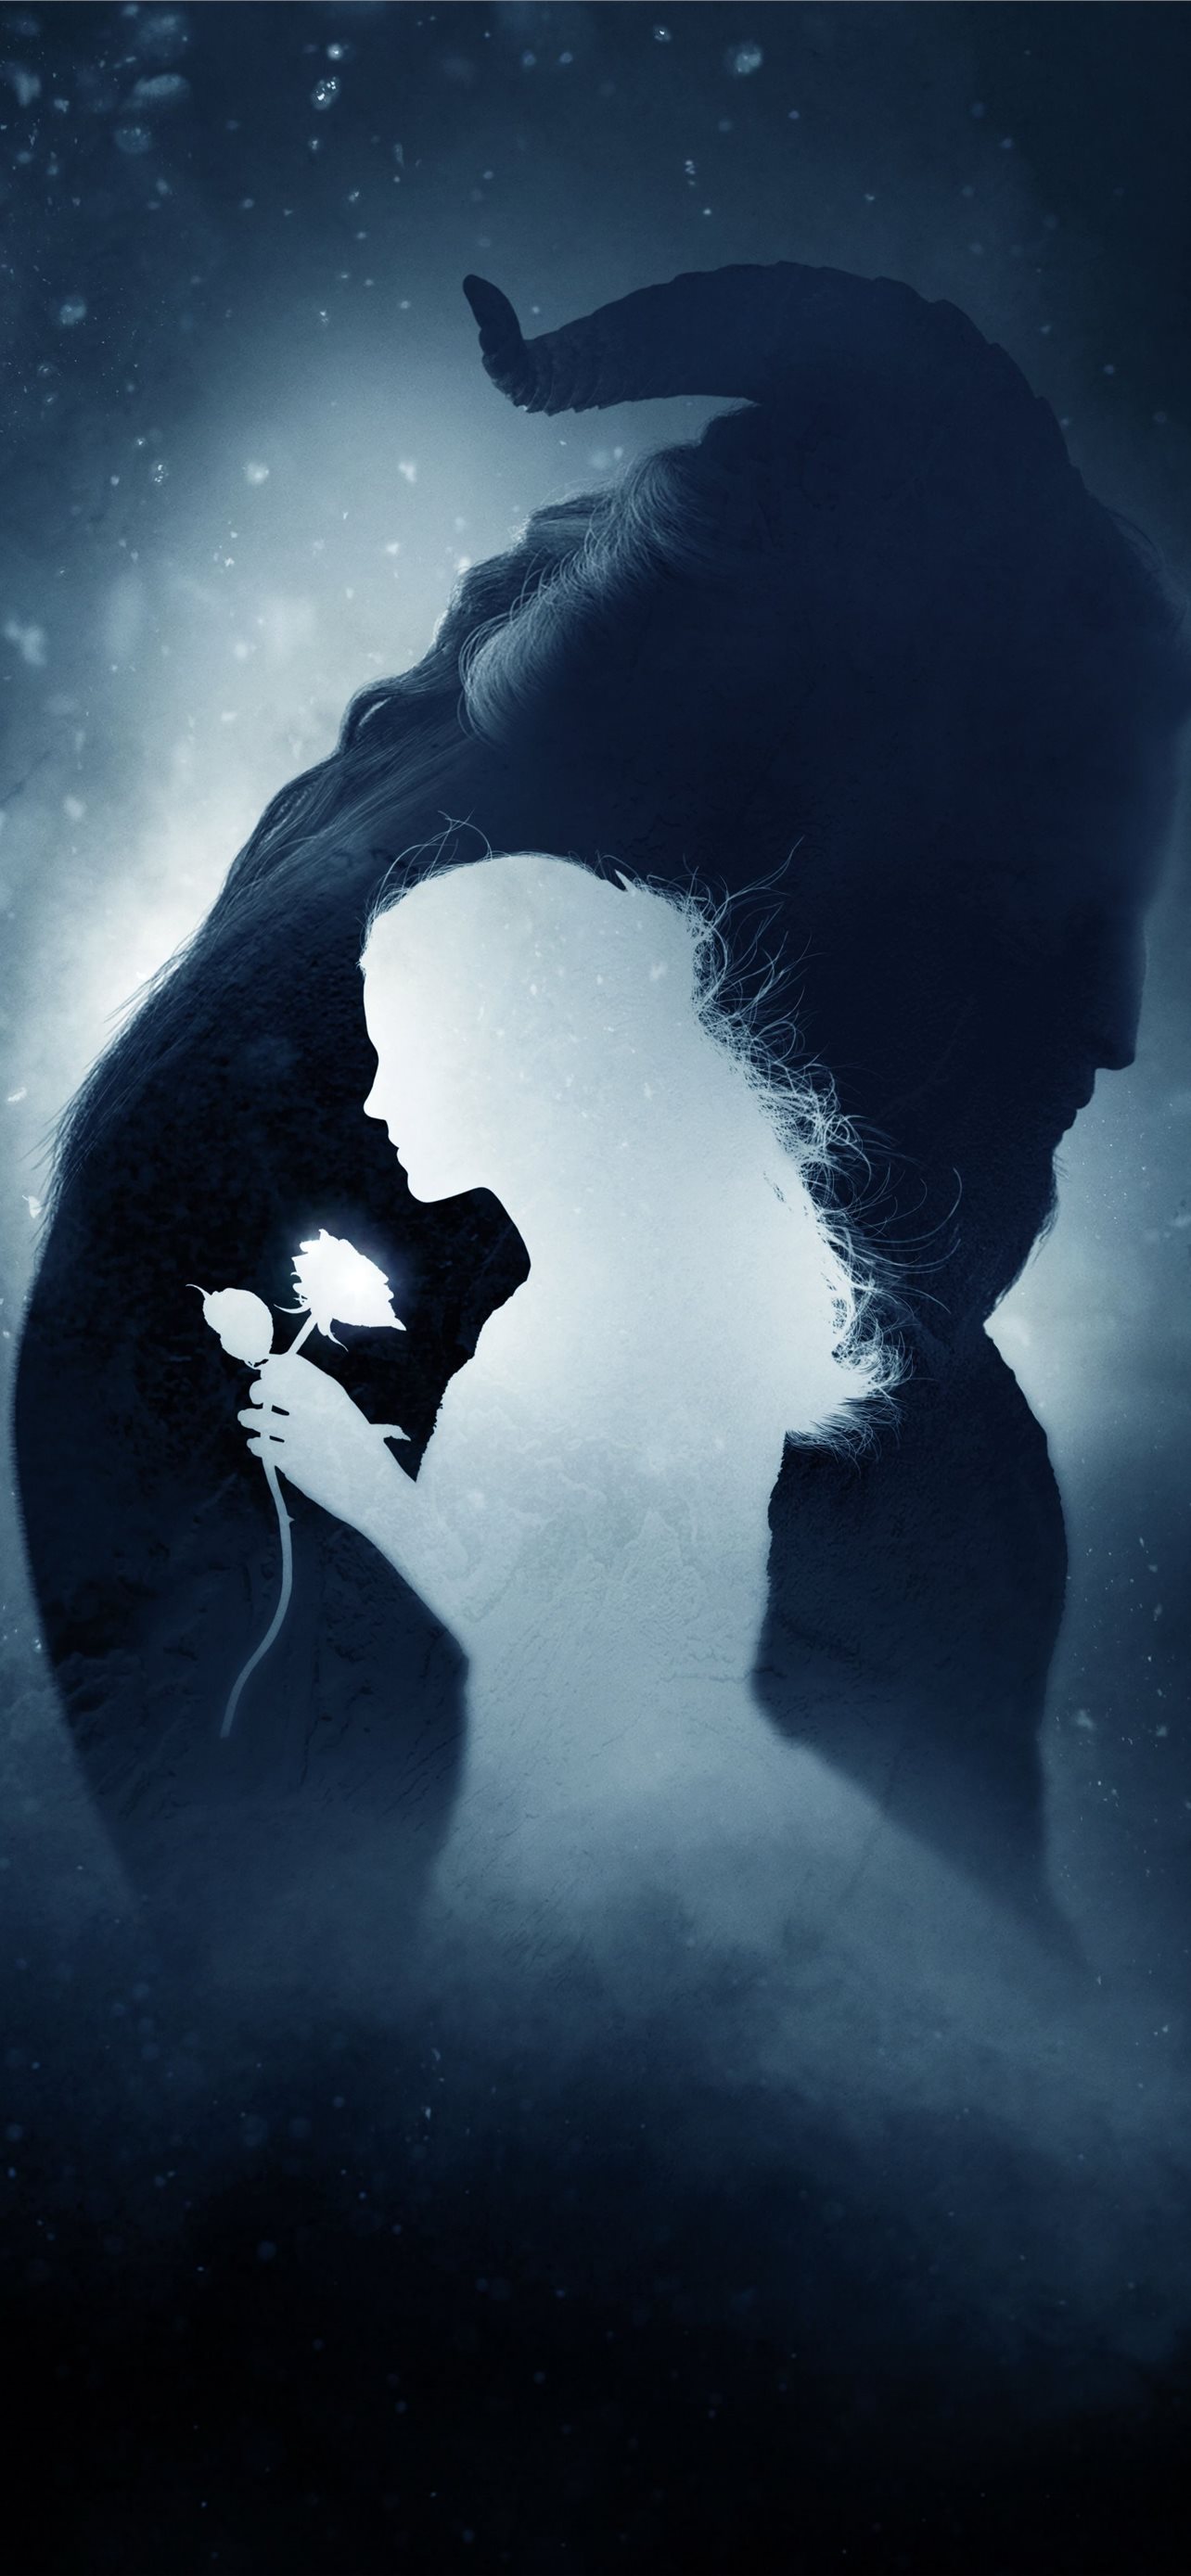 beauty and the beast iPhone Wallpapers Free Download